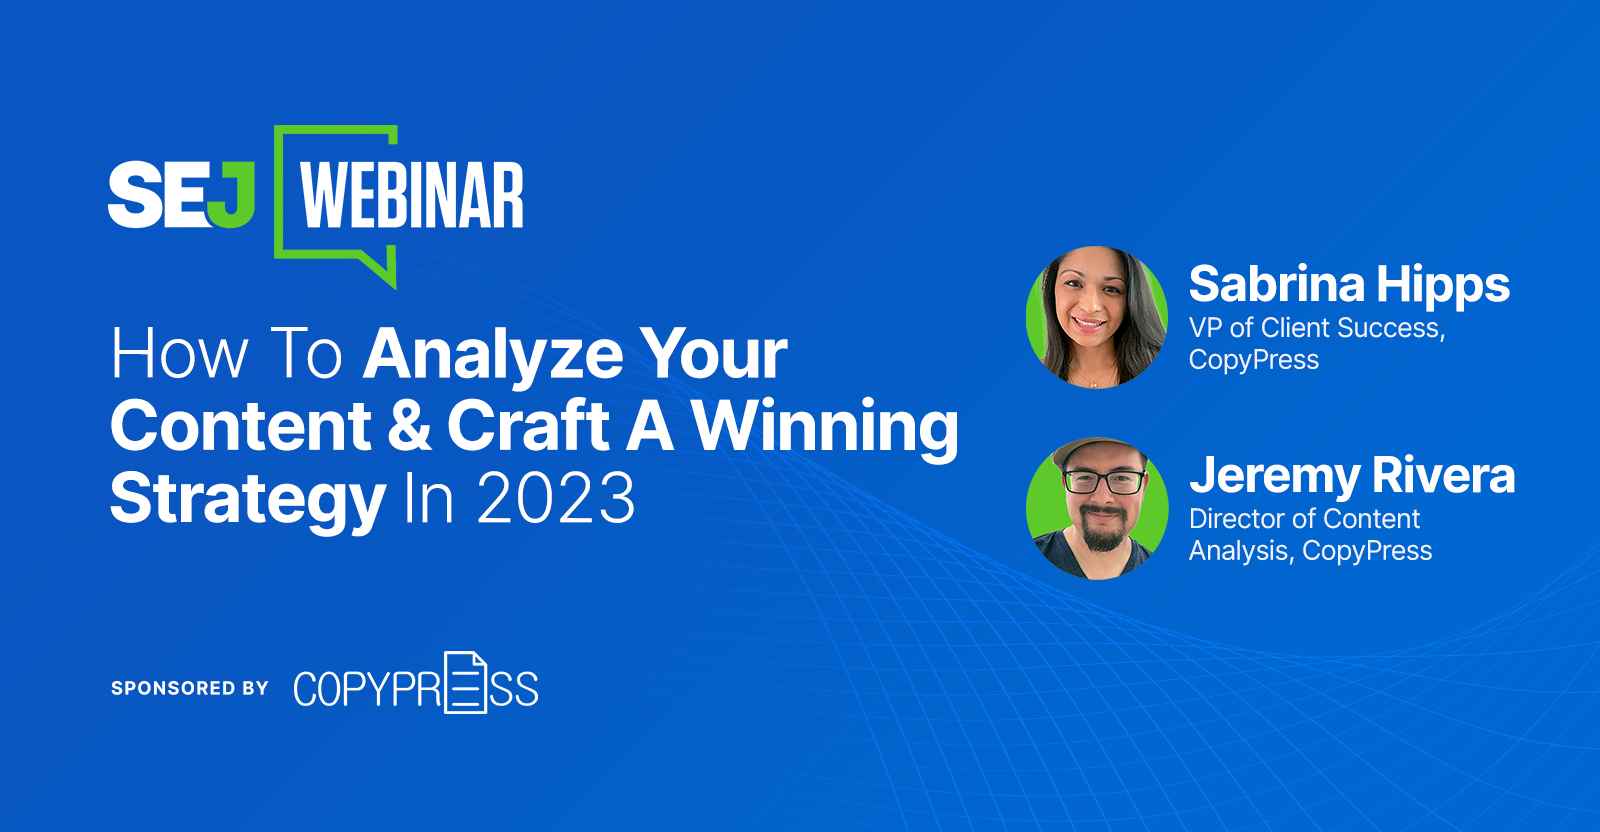 How to analyze your content and develop a winning strategy in 2023